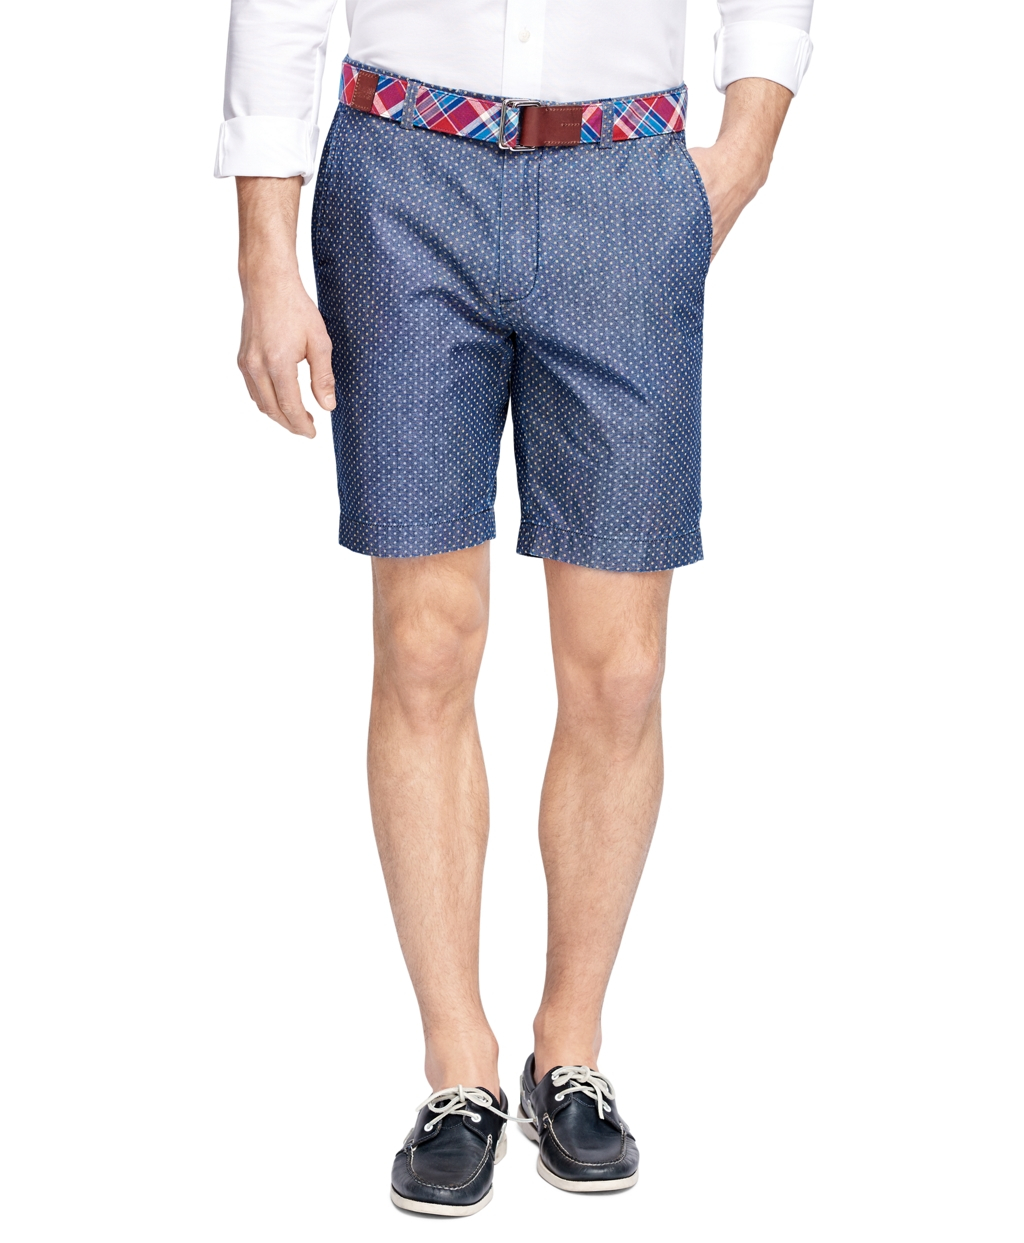 Lyst - Brooks Brothers Printed Dot Bermuda Shorts in Blue for Men